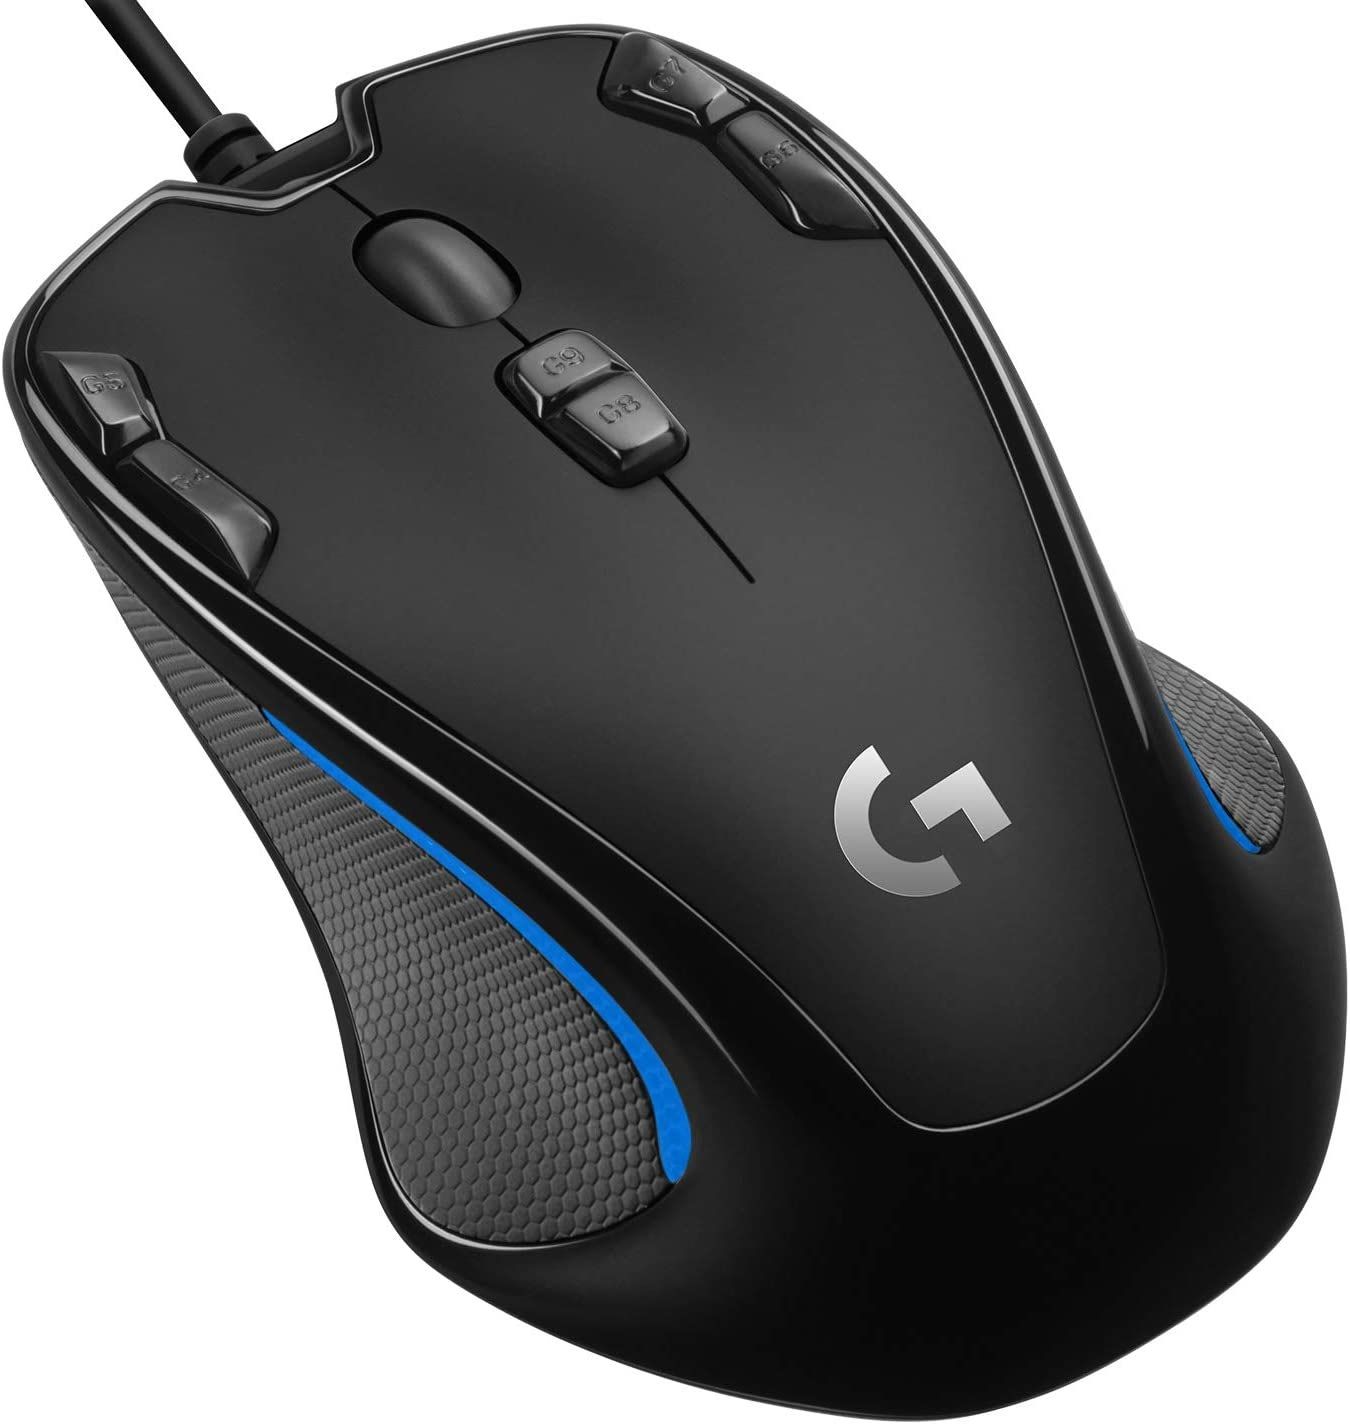 the logitech g300s featuring extra buttons